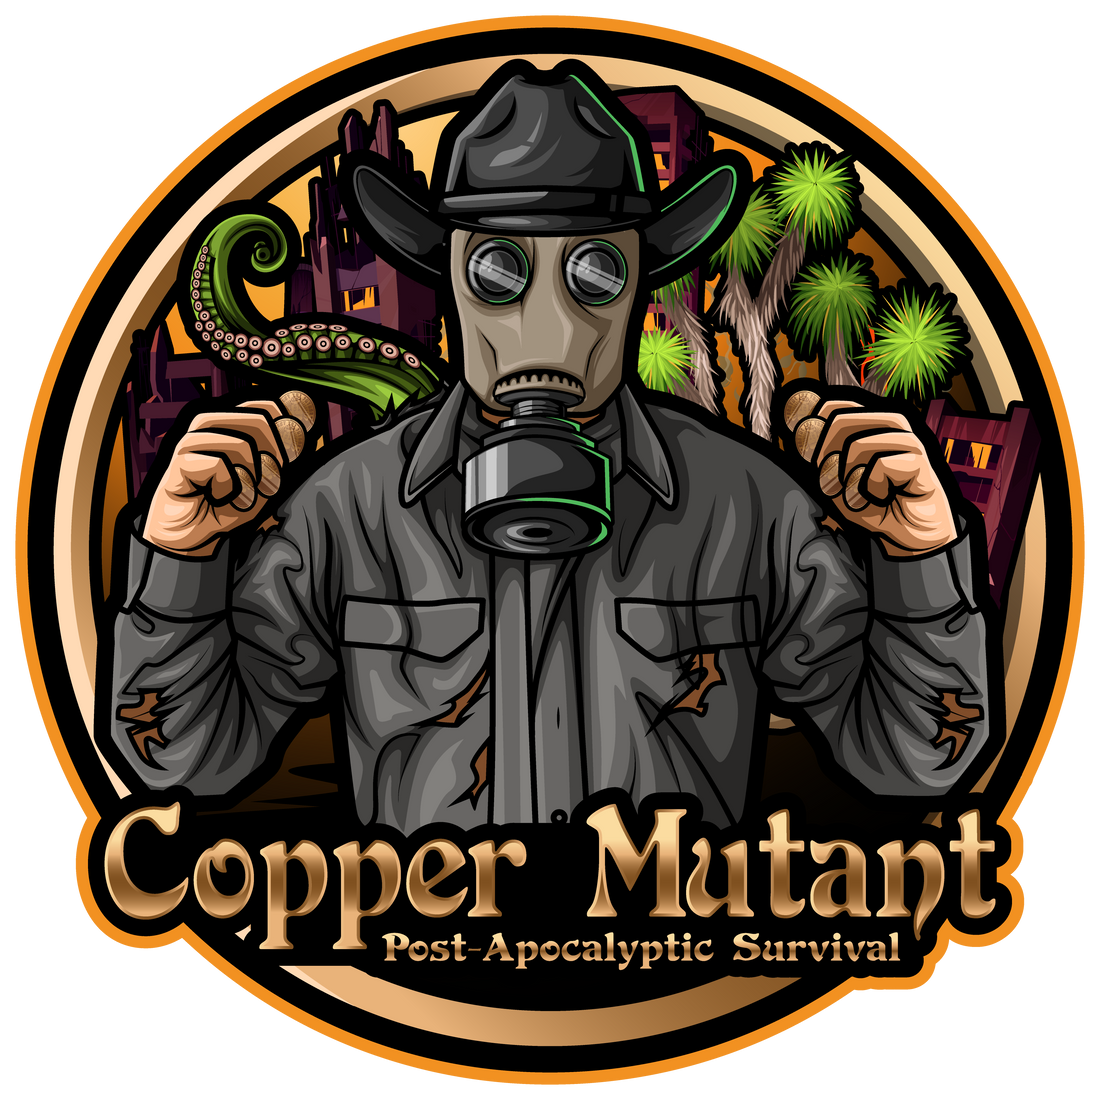 The Copper Mutant logo - What does it mean?